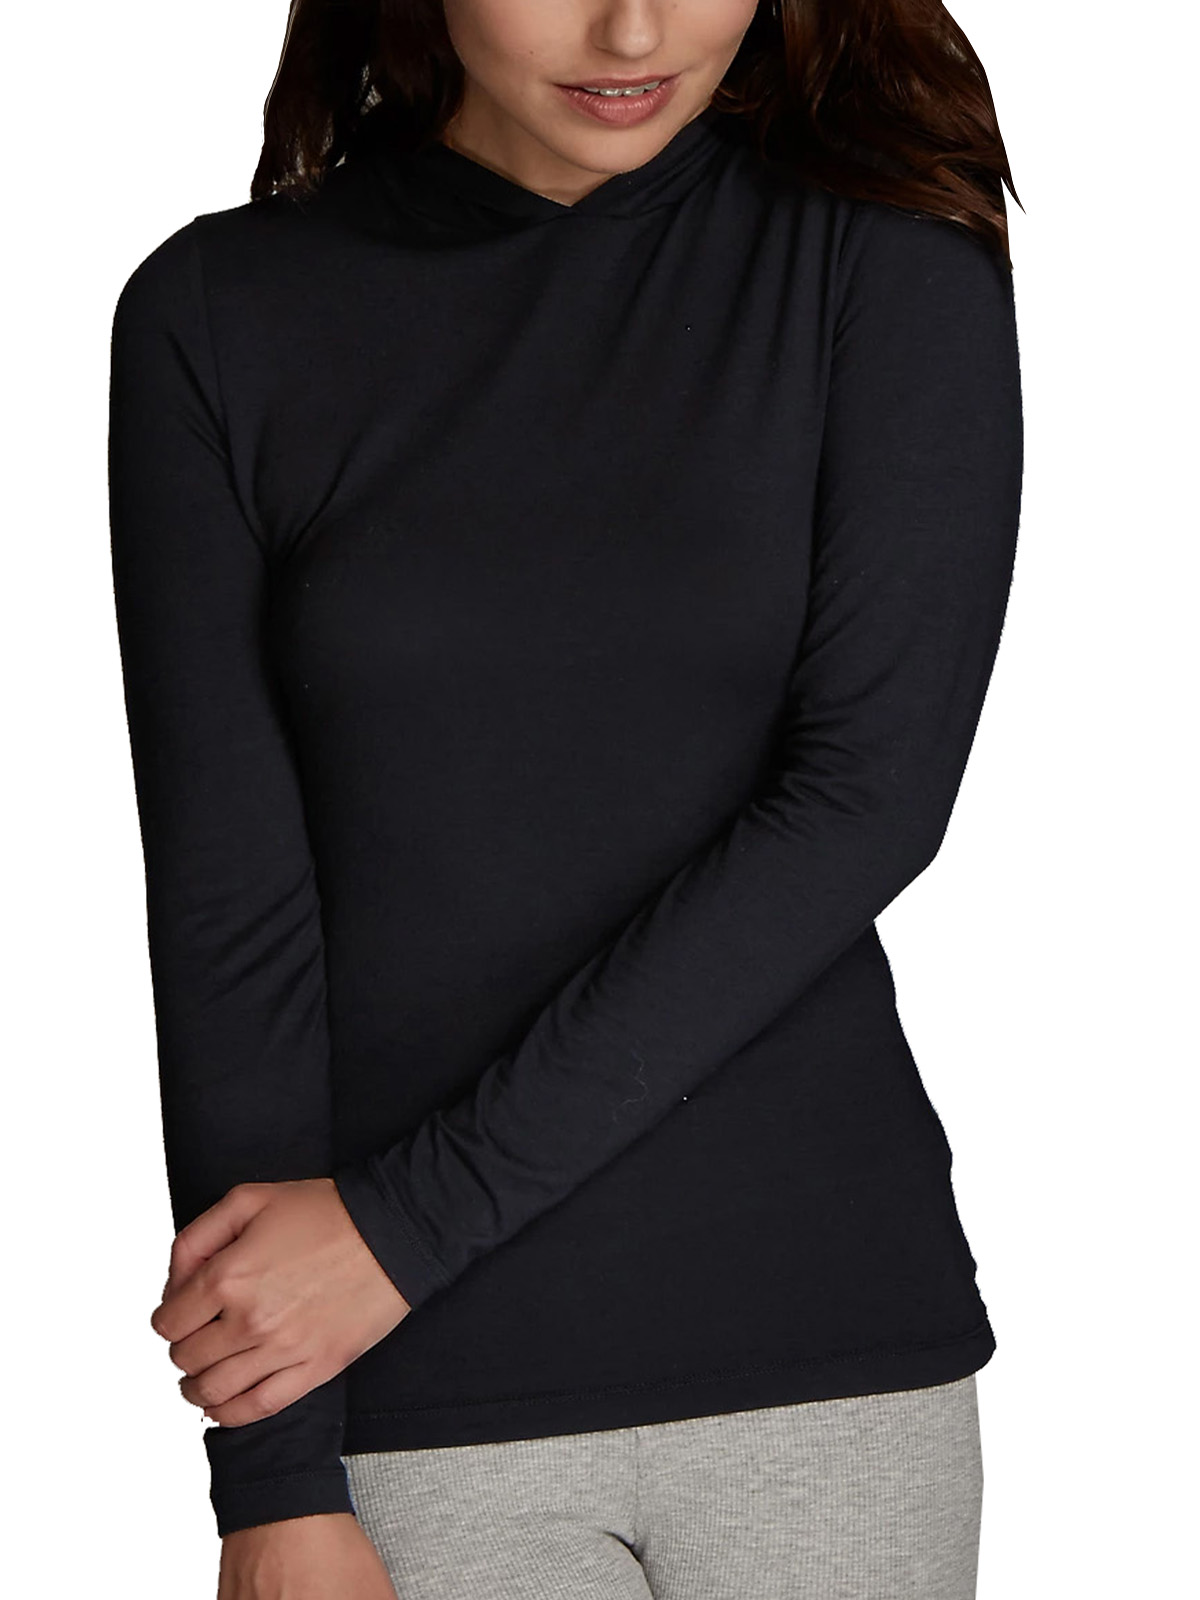 Marks and Spencer - - M&5 BLACK Hooded Heatgen Thermal Long Sleeve Top ...